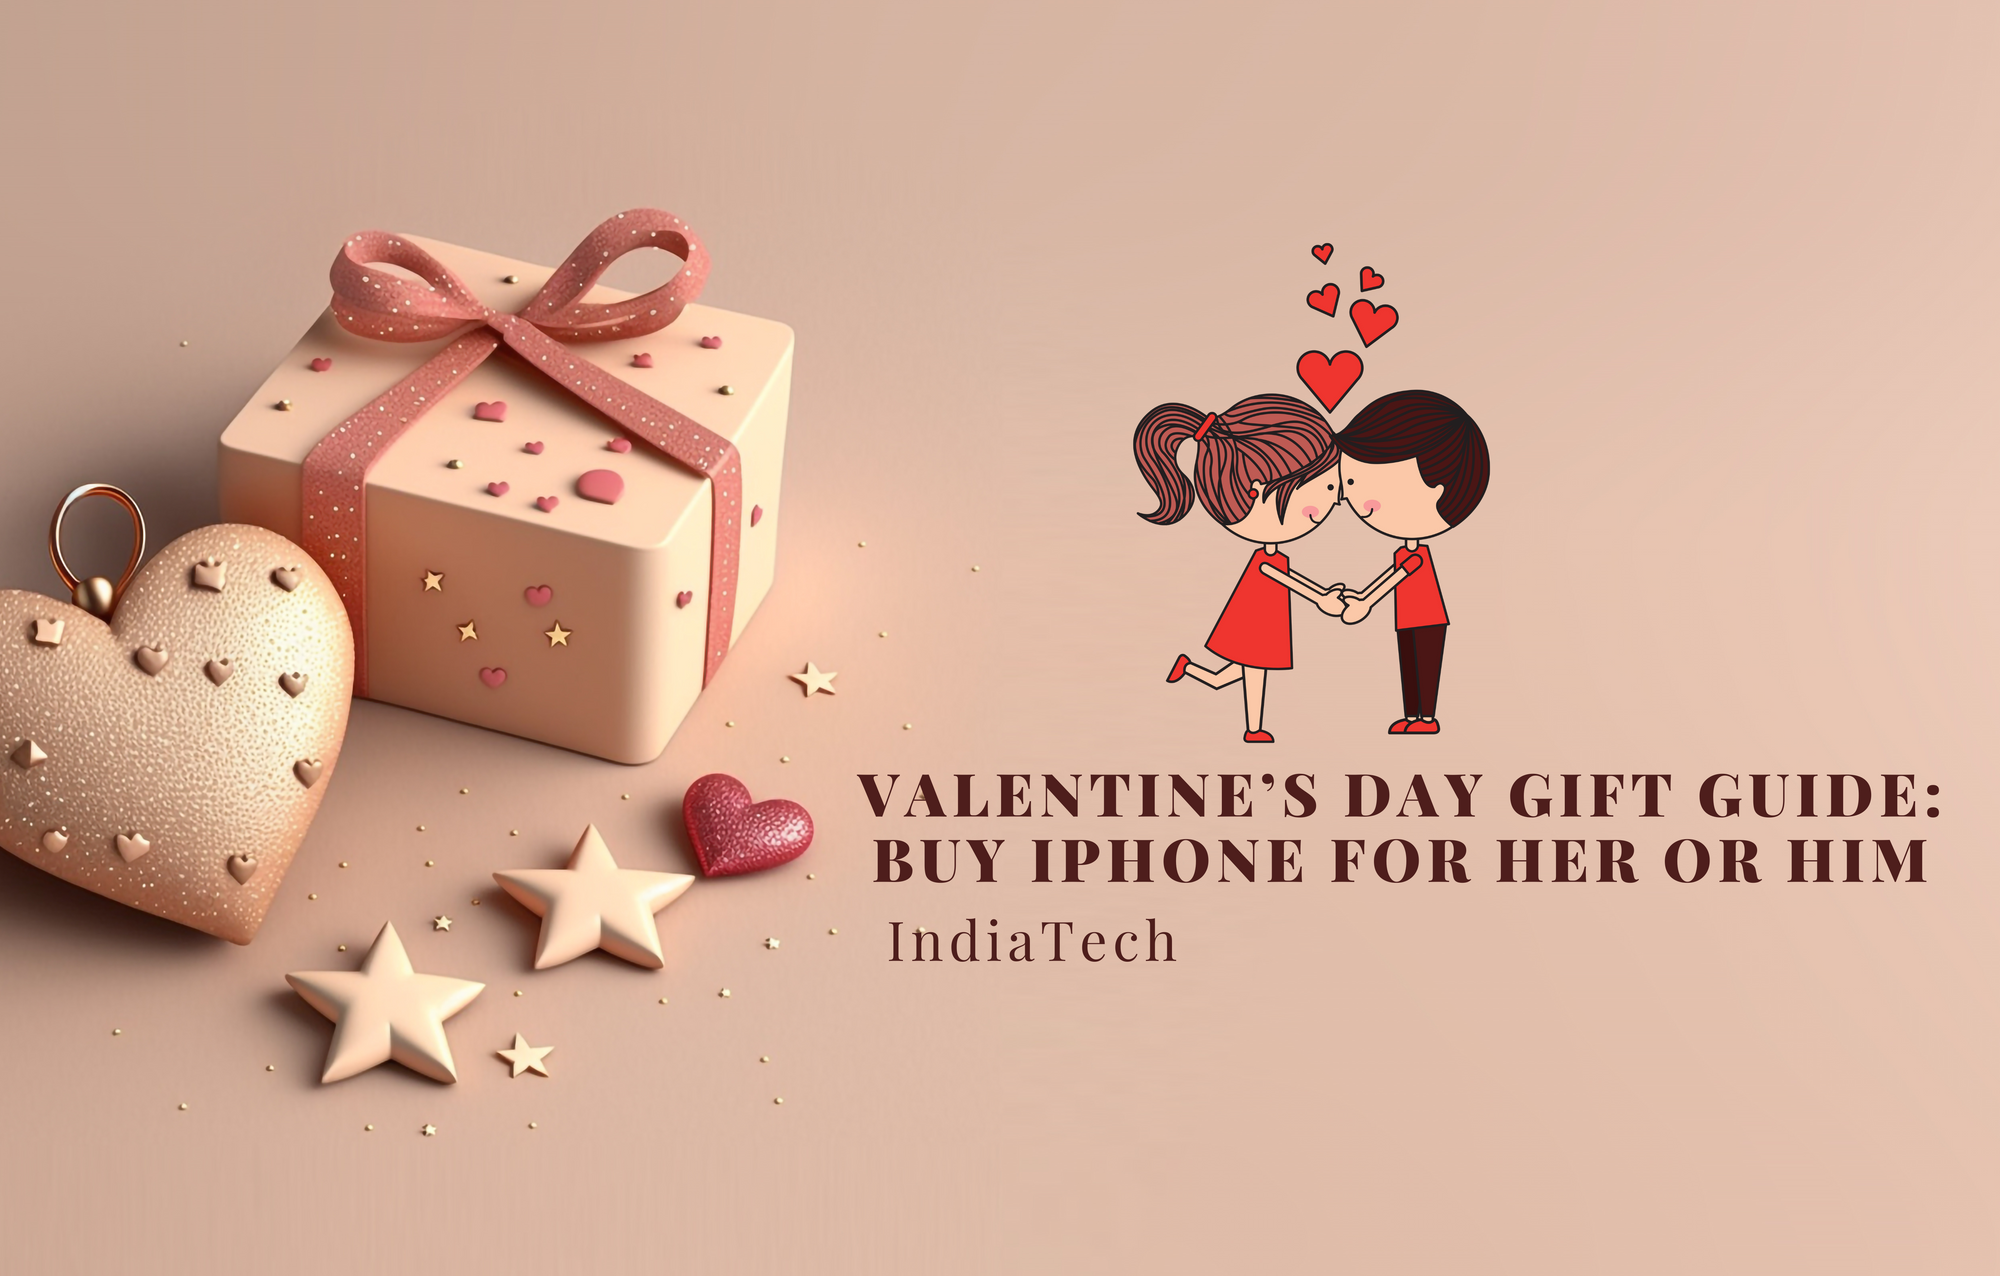 Valentine’s Day Gift Guide: Buy iPhone for Her or Him